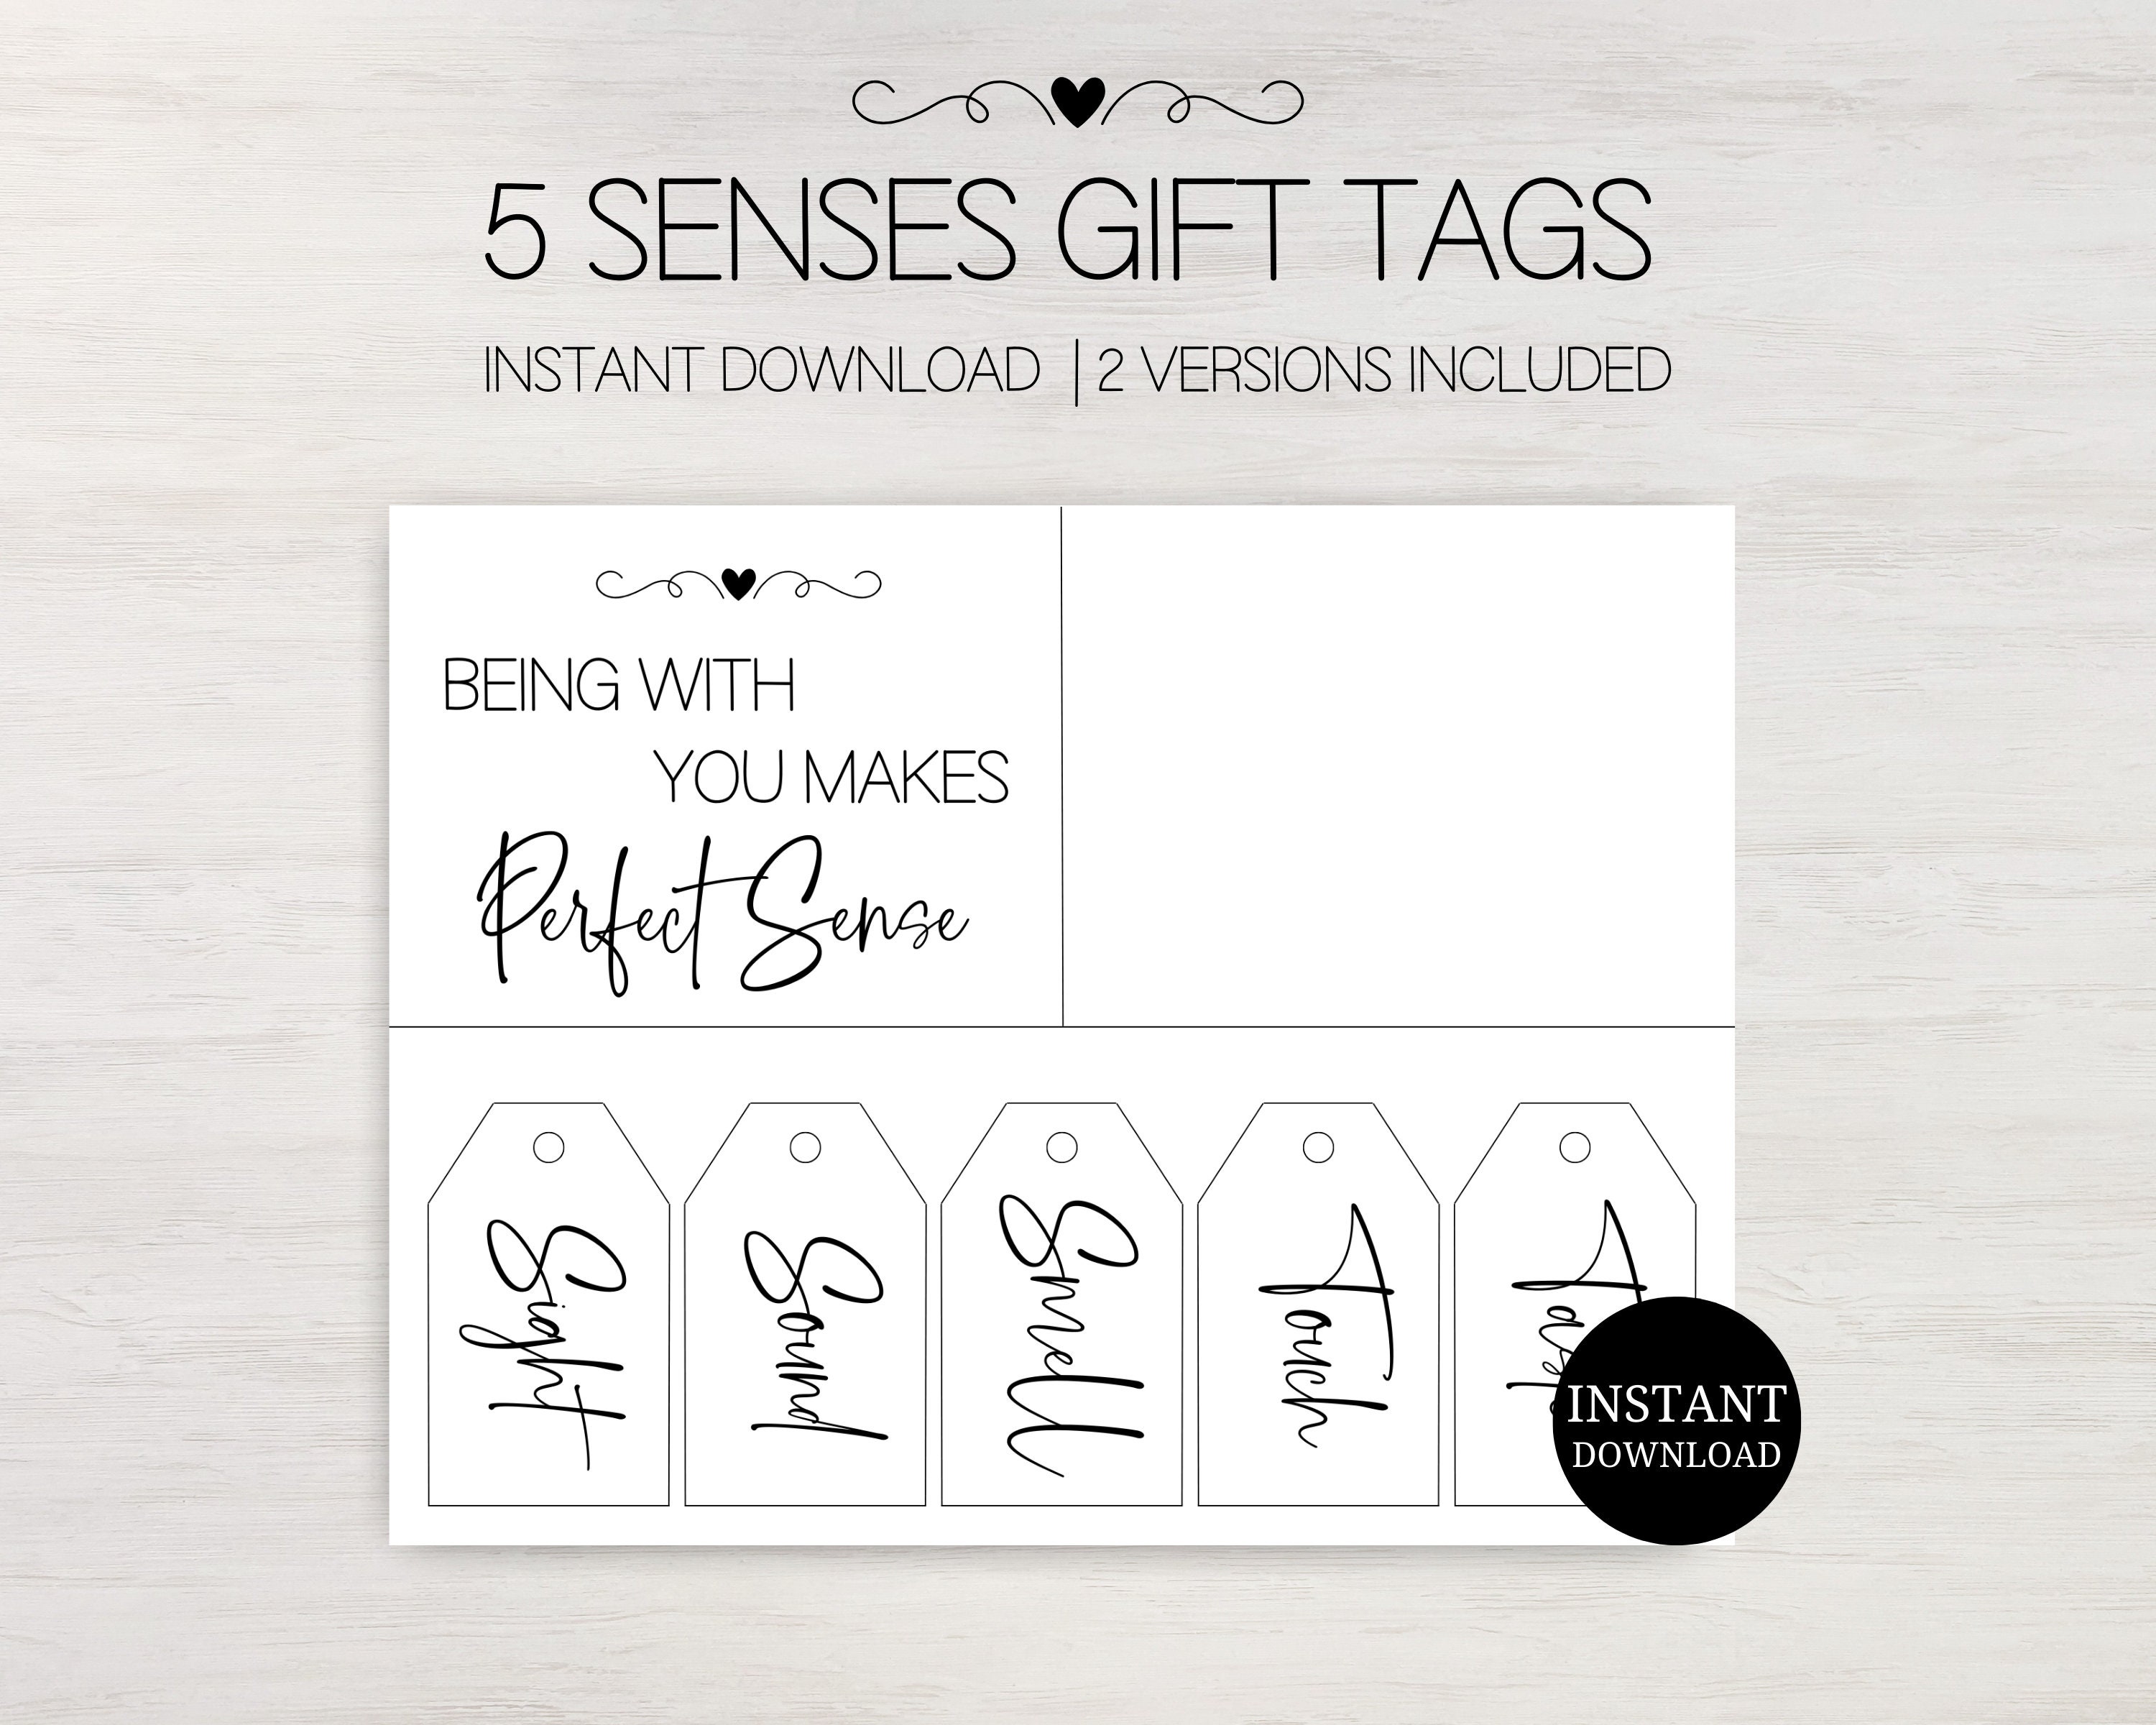 5 Senses Gift Tag Printable / Five Senses Gift Tags & Card / 50 Gift Ideas  for Him or Her / Whimsical Cursive Font / PDF Digital Download 